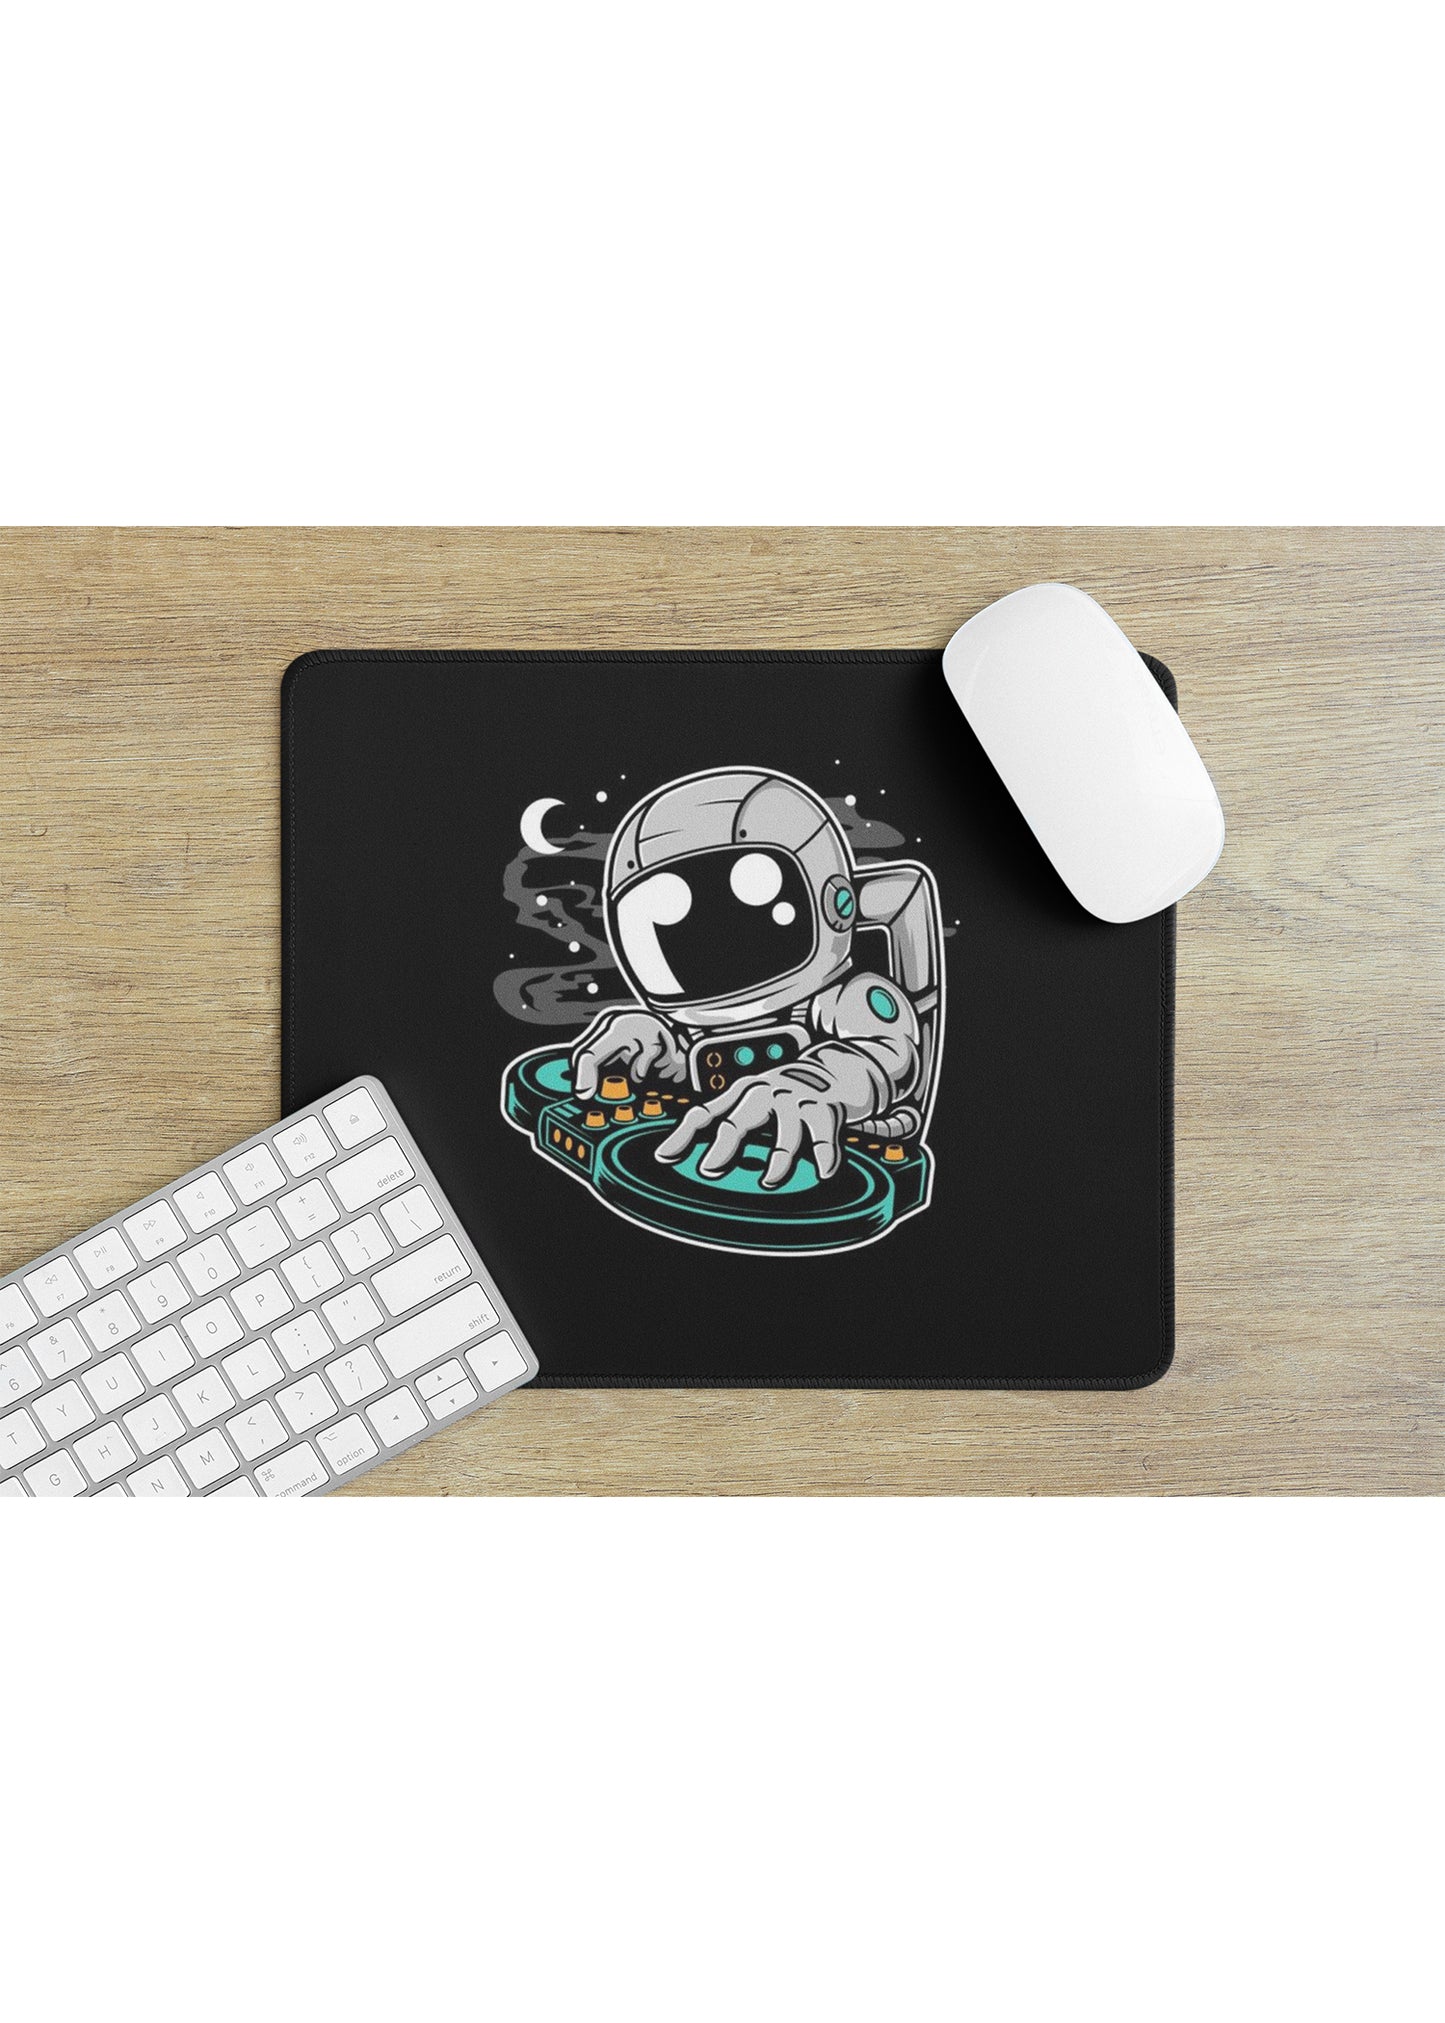 ASTRONAUT MOUSE PAD